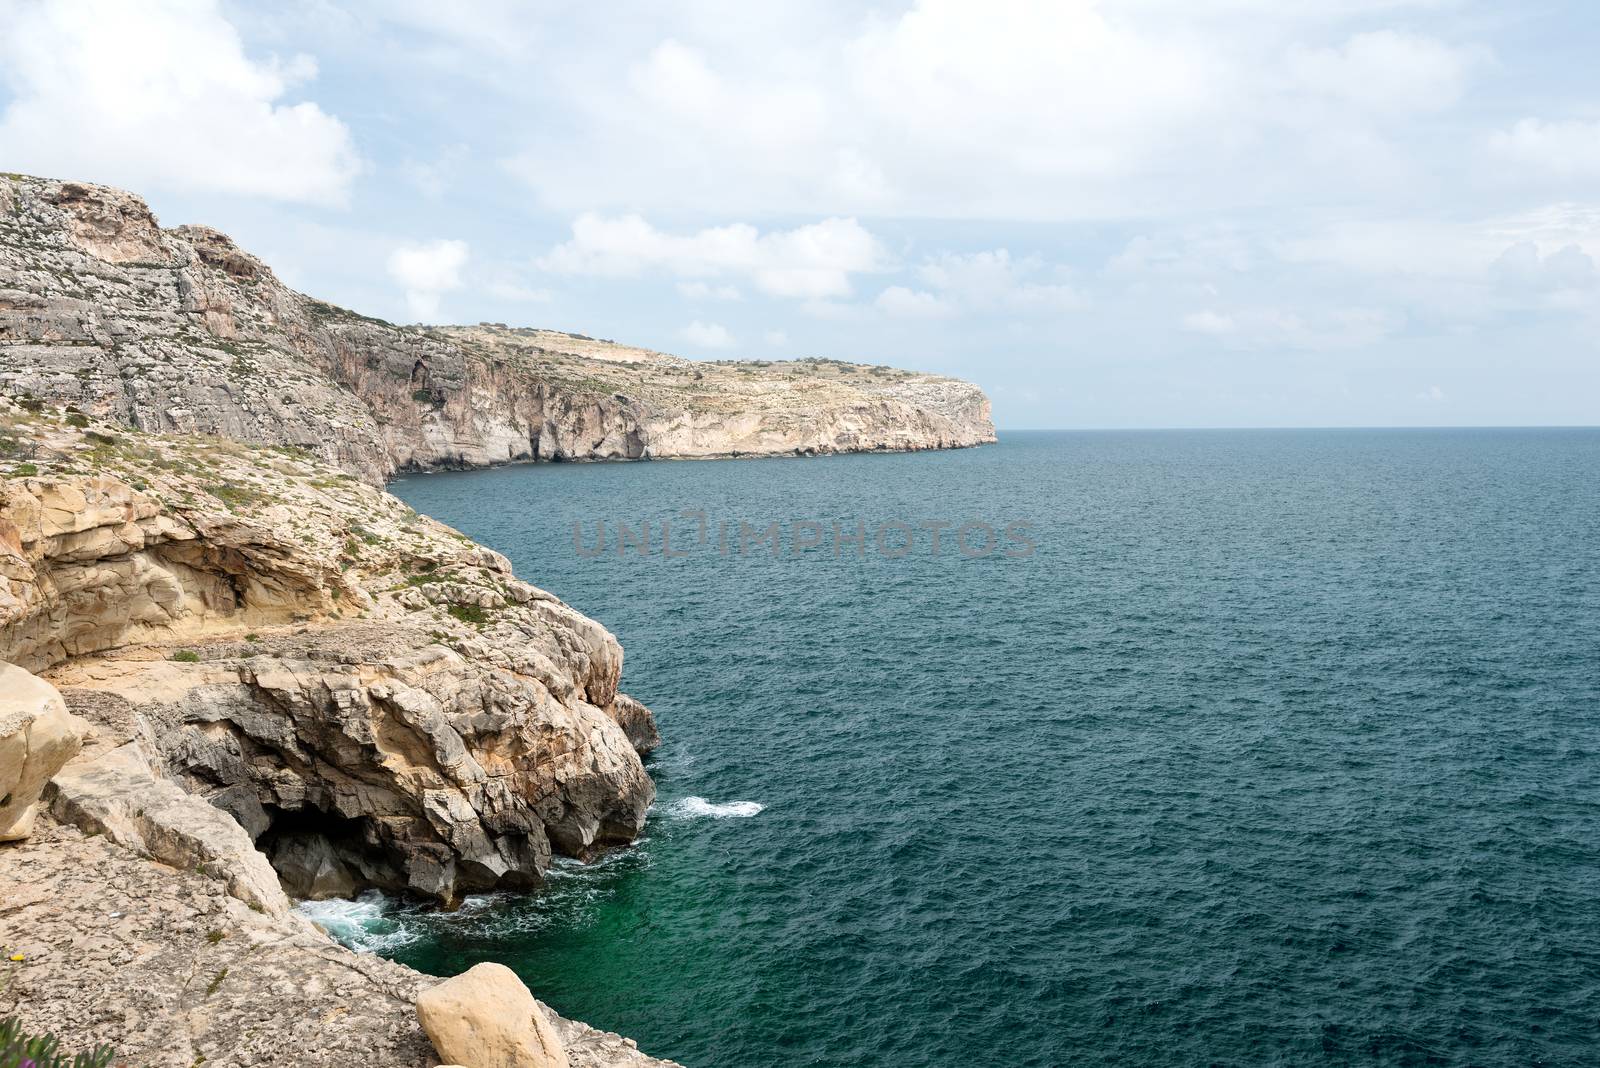 Caves and cliffs at the coast of Gozo Island, Malta